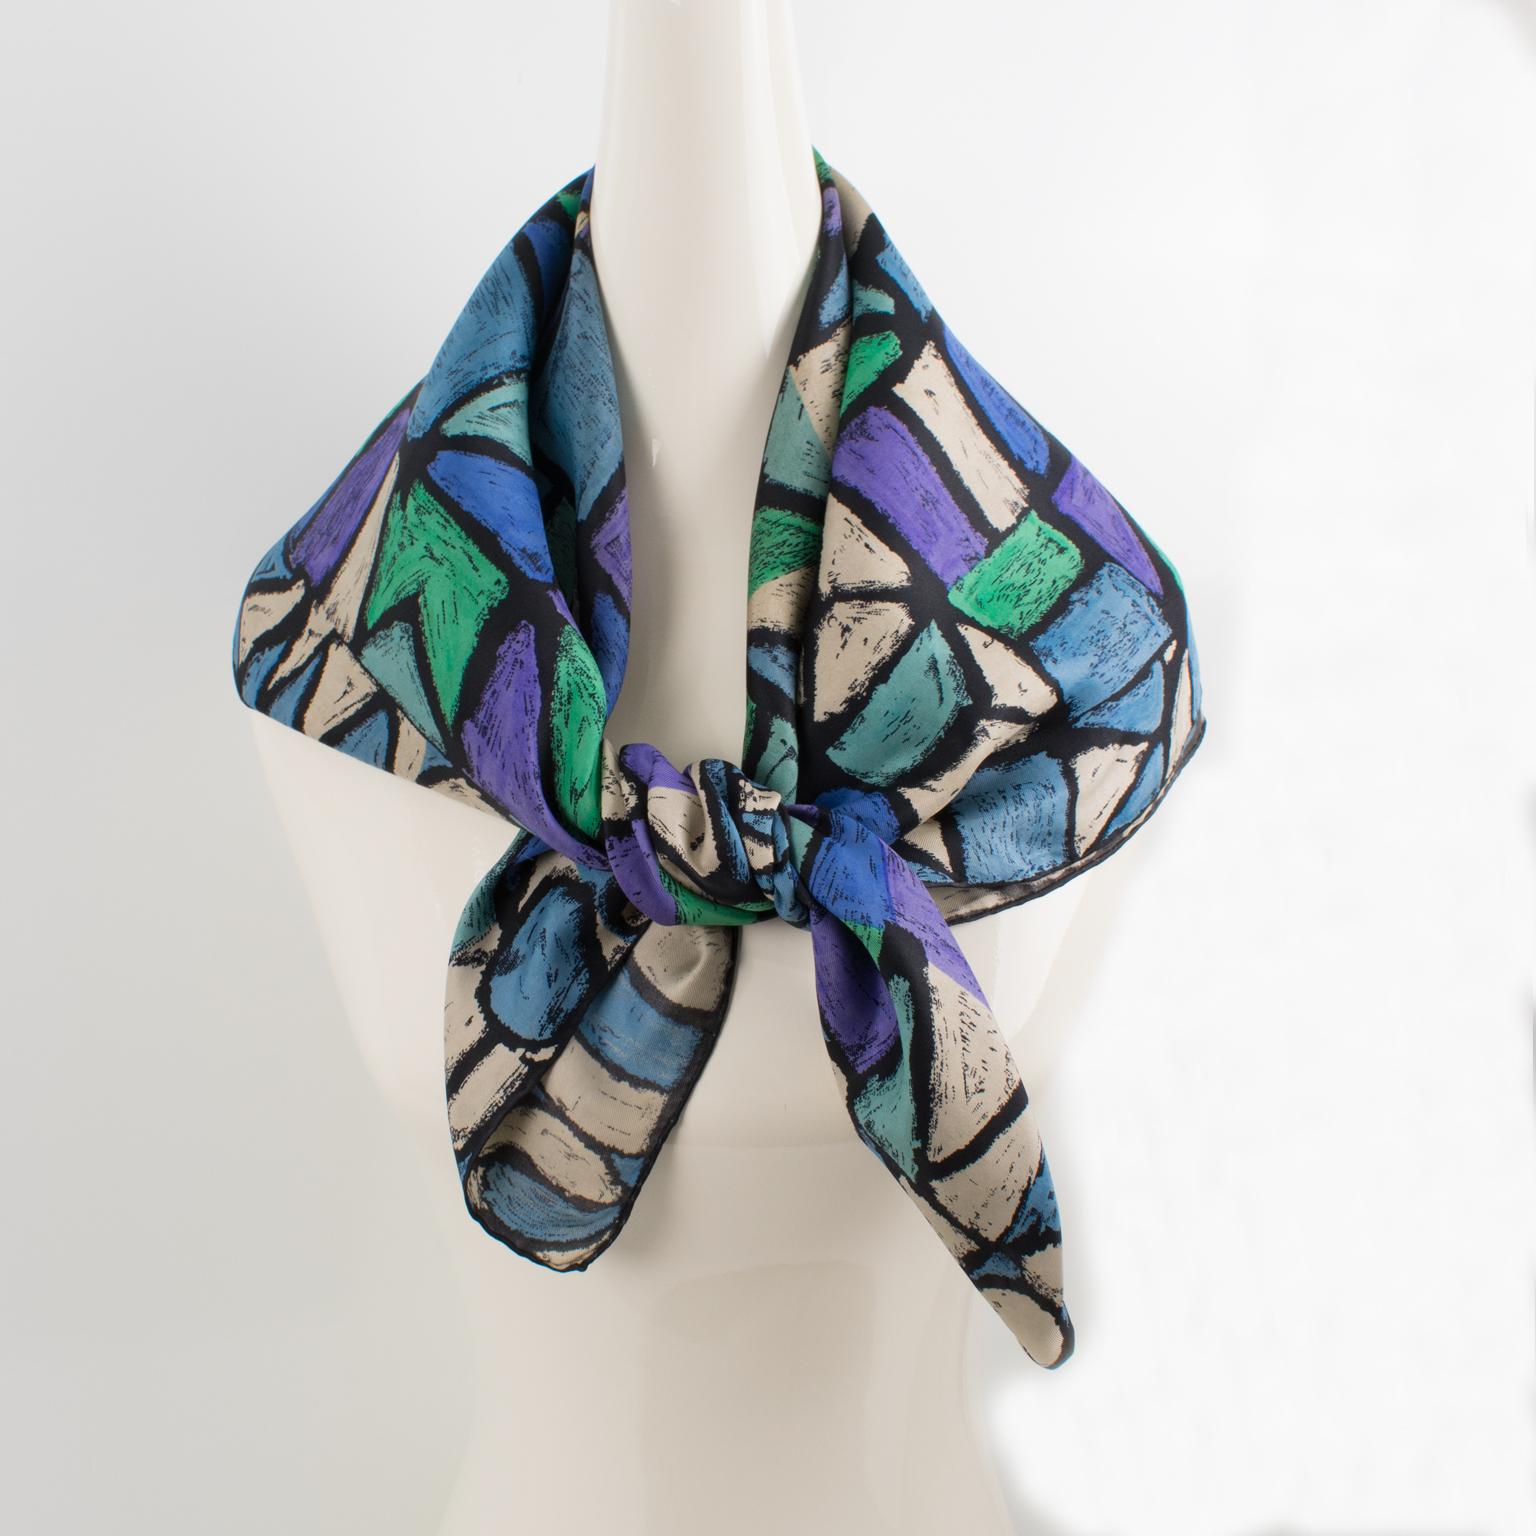 Antonio Castillo designed this lovely silk scarf for Jeanne Lanvin Paris in the 1950s. The design features graphic letters printed in blue, turquoise, and purple colors and is signed on the bottom right corner by Jeanne Lanvin and Castillo. The